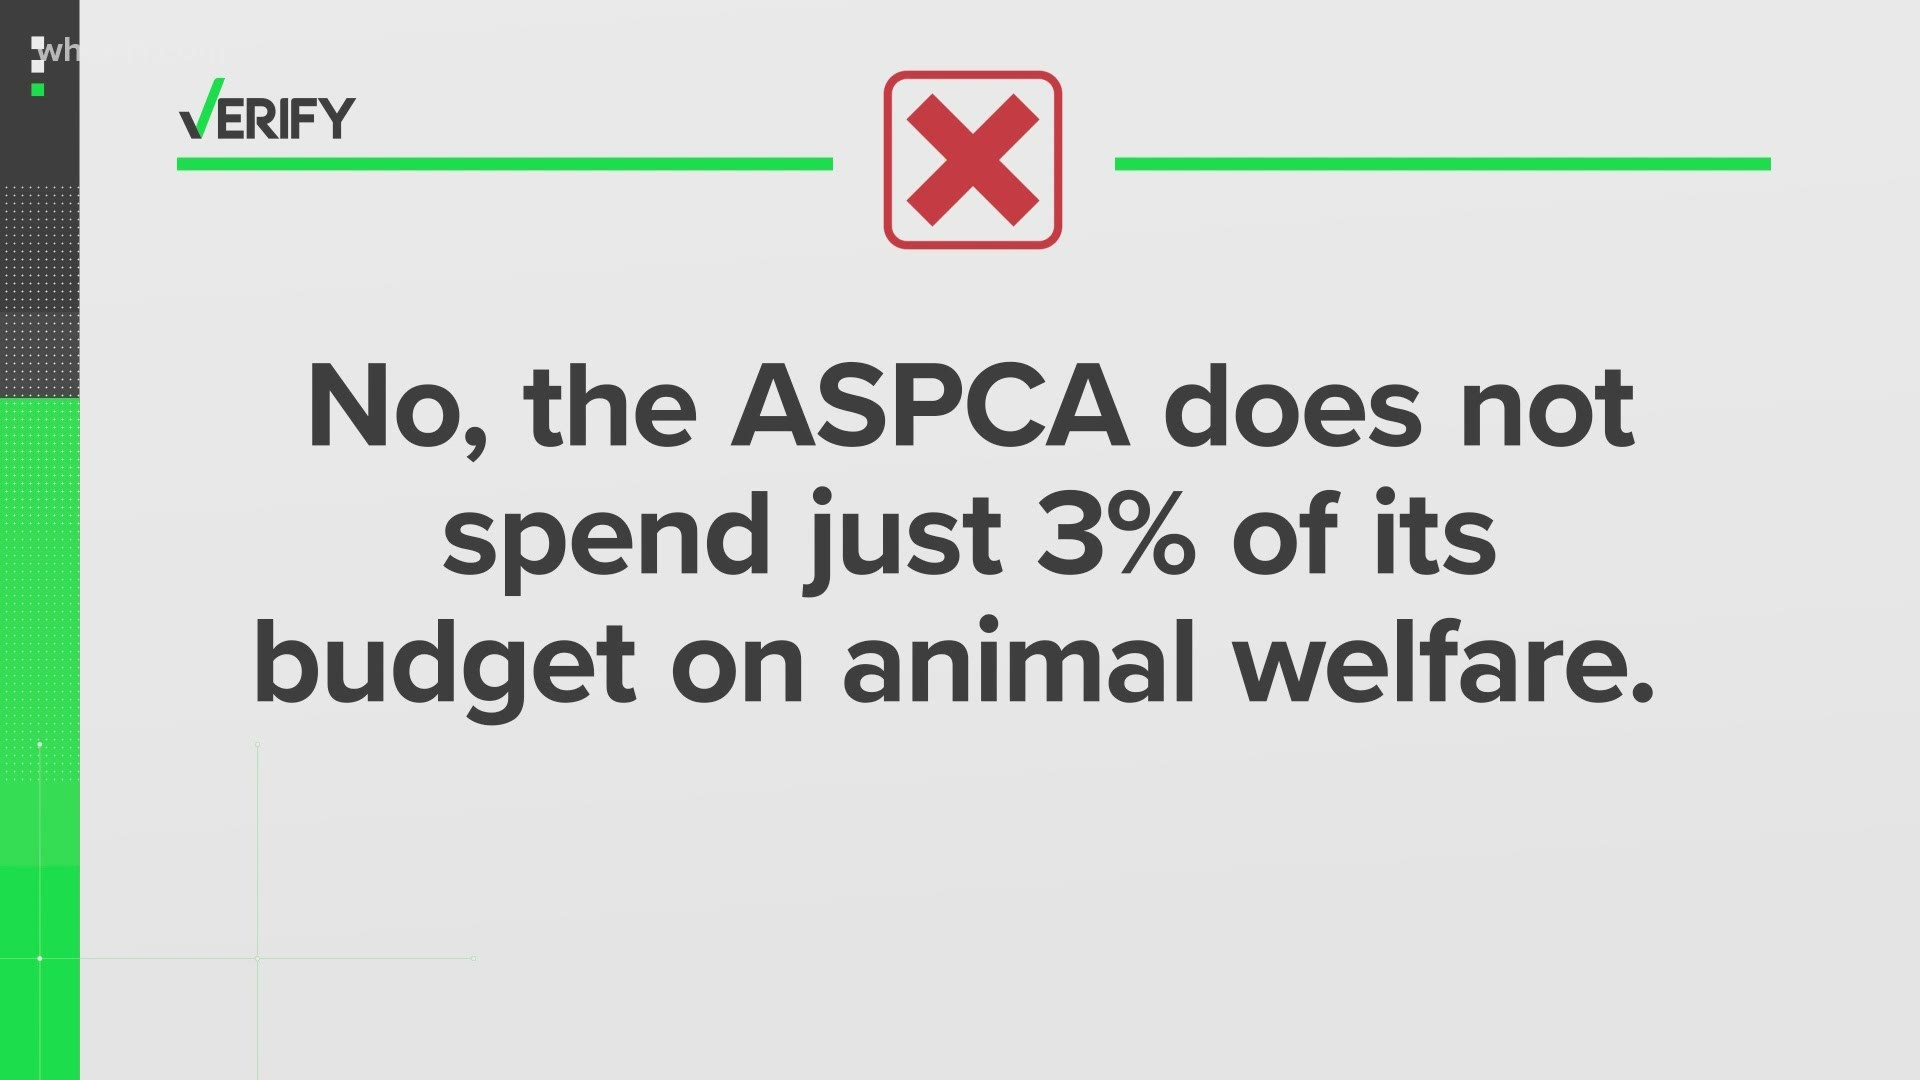 A Facebook post appears to imply that 3% of funding is all the ASPCA commits to animal welfare. Is this true? Here's what our VERIFY team found out.